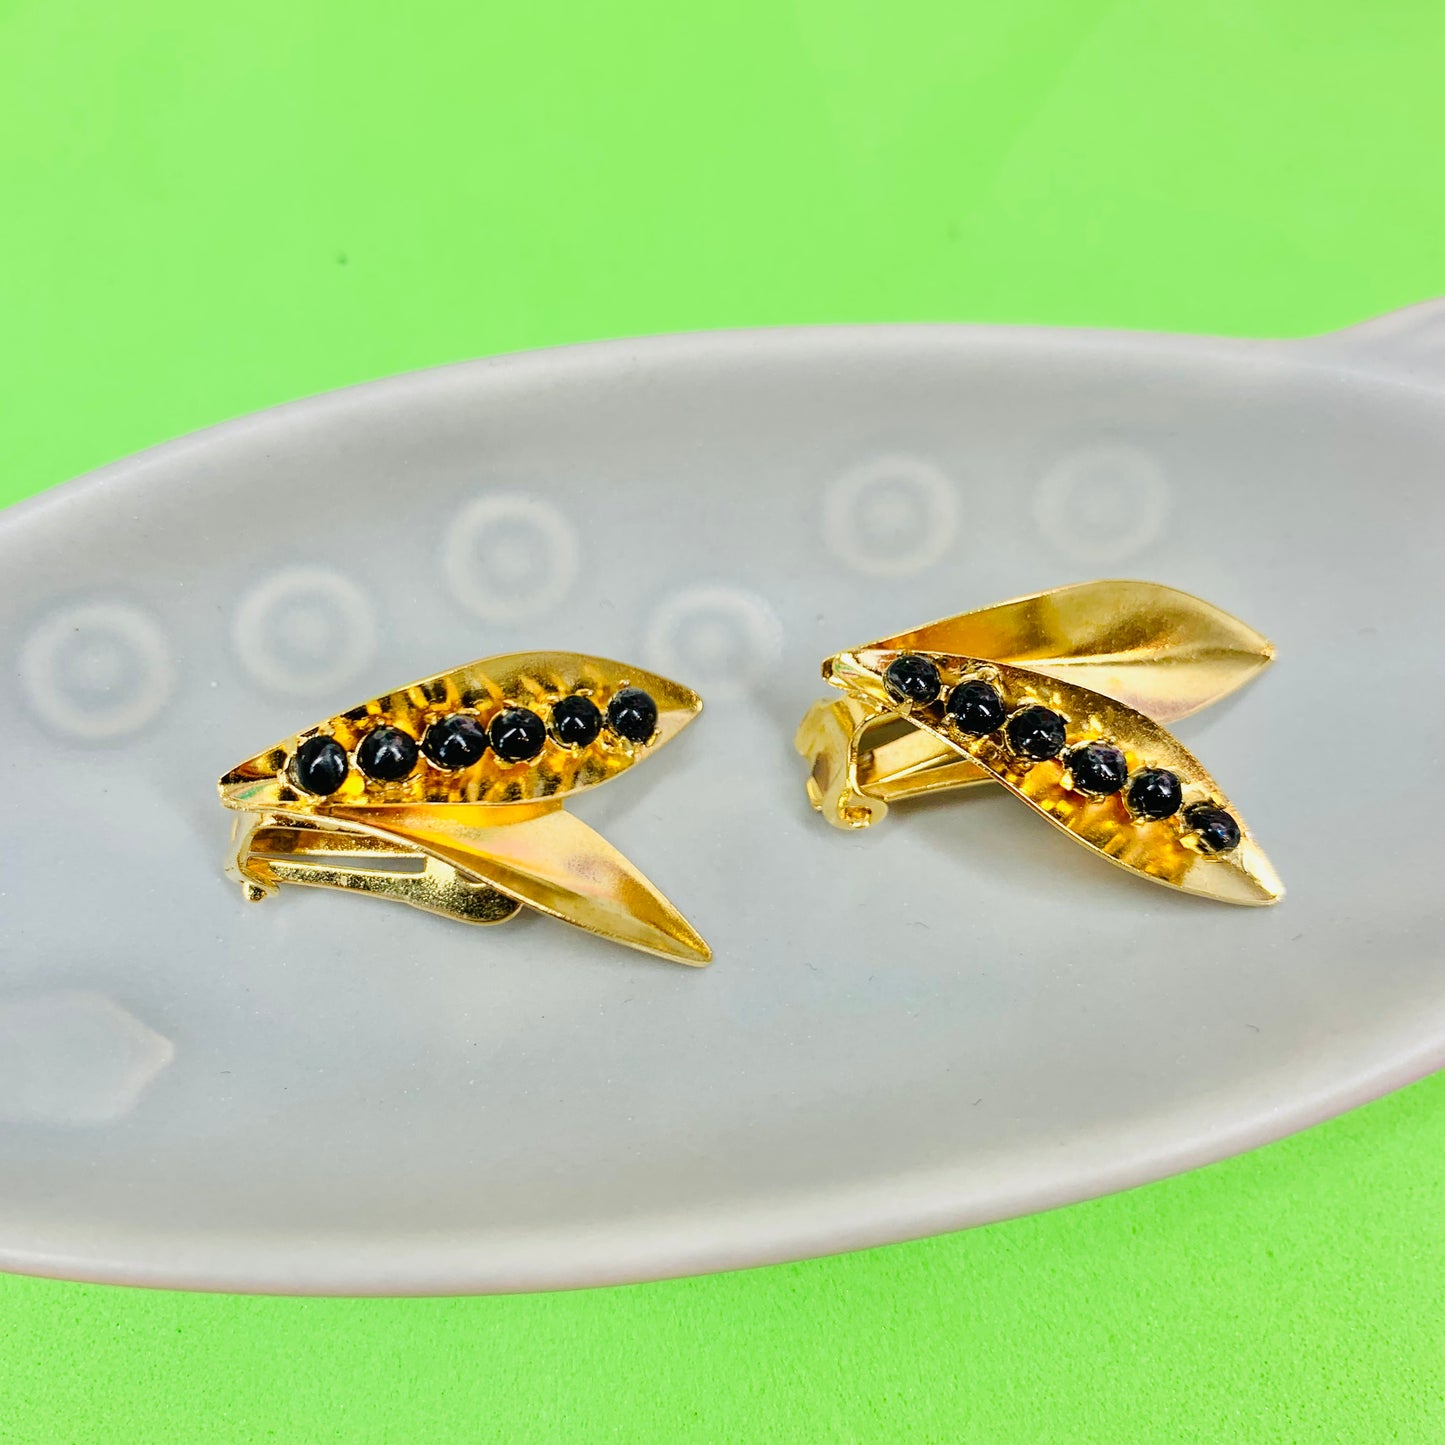 1960s brass clip on wings earrings with black beads